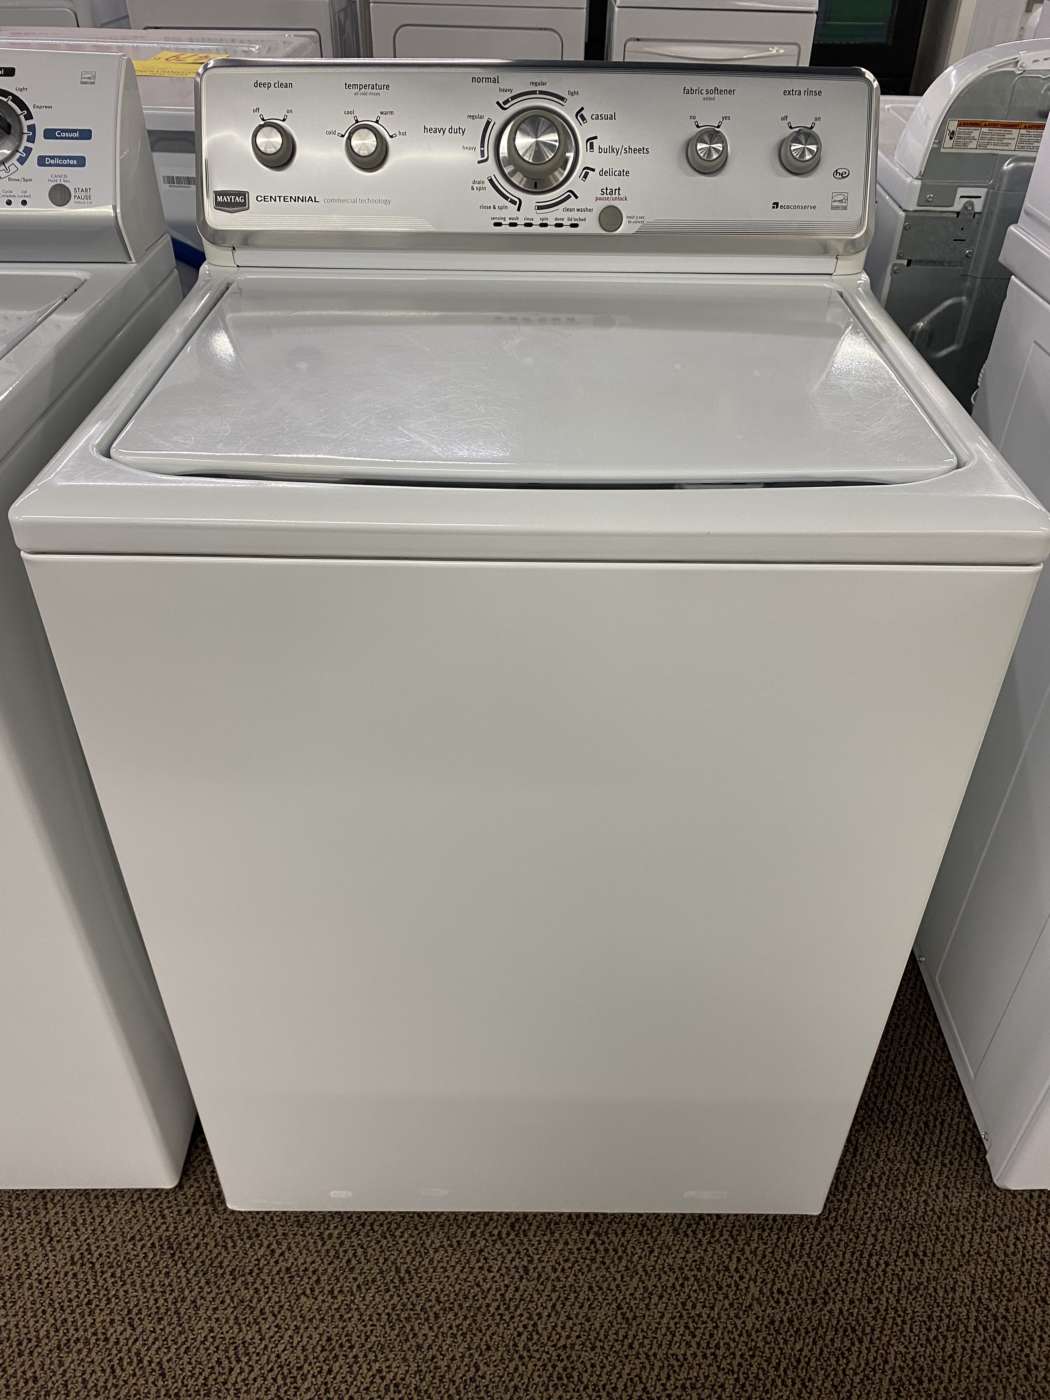 Reconditioned MAYTAG 3.6 Cu. Ft. Top-Load H/E Washer – White